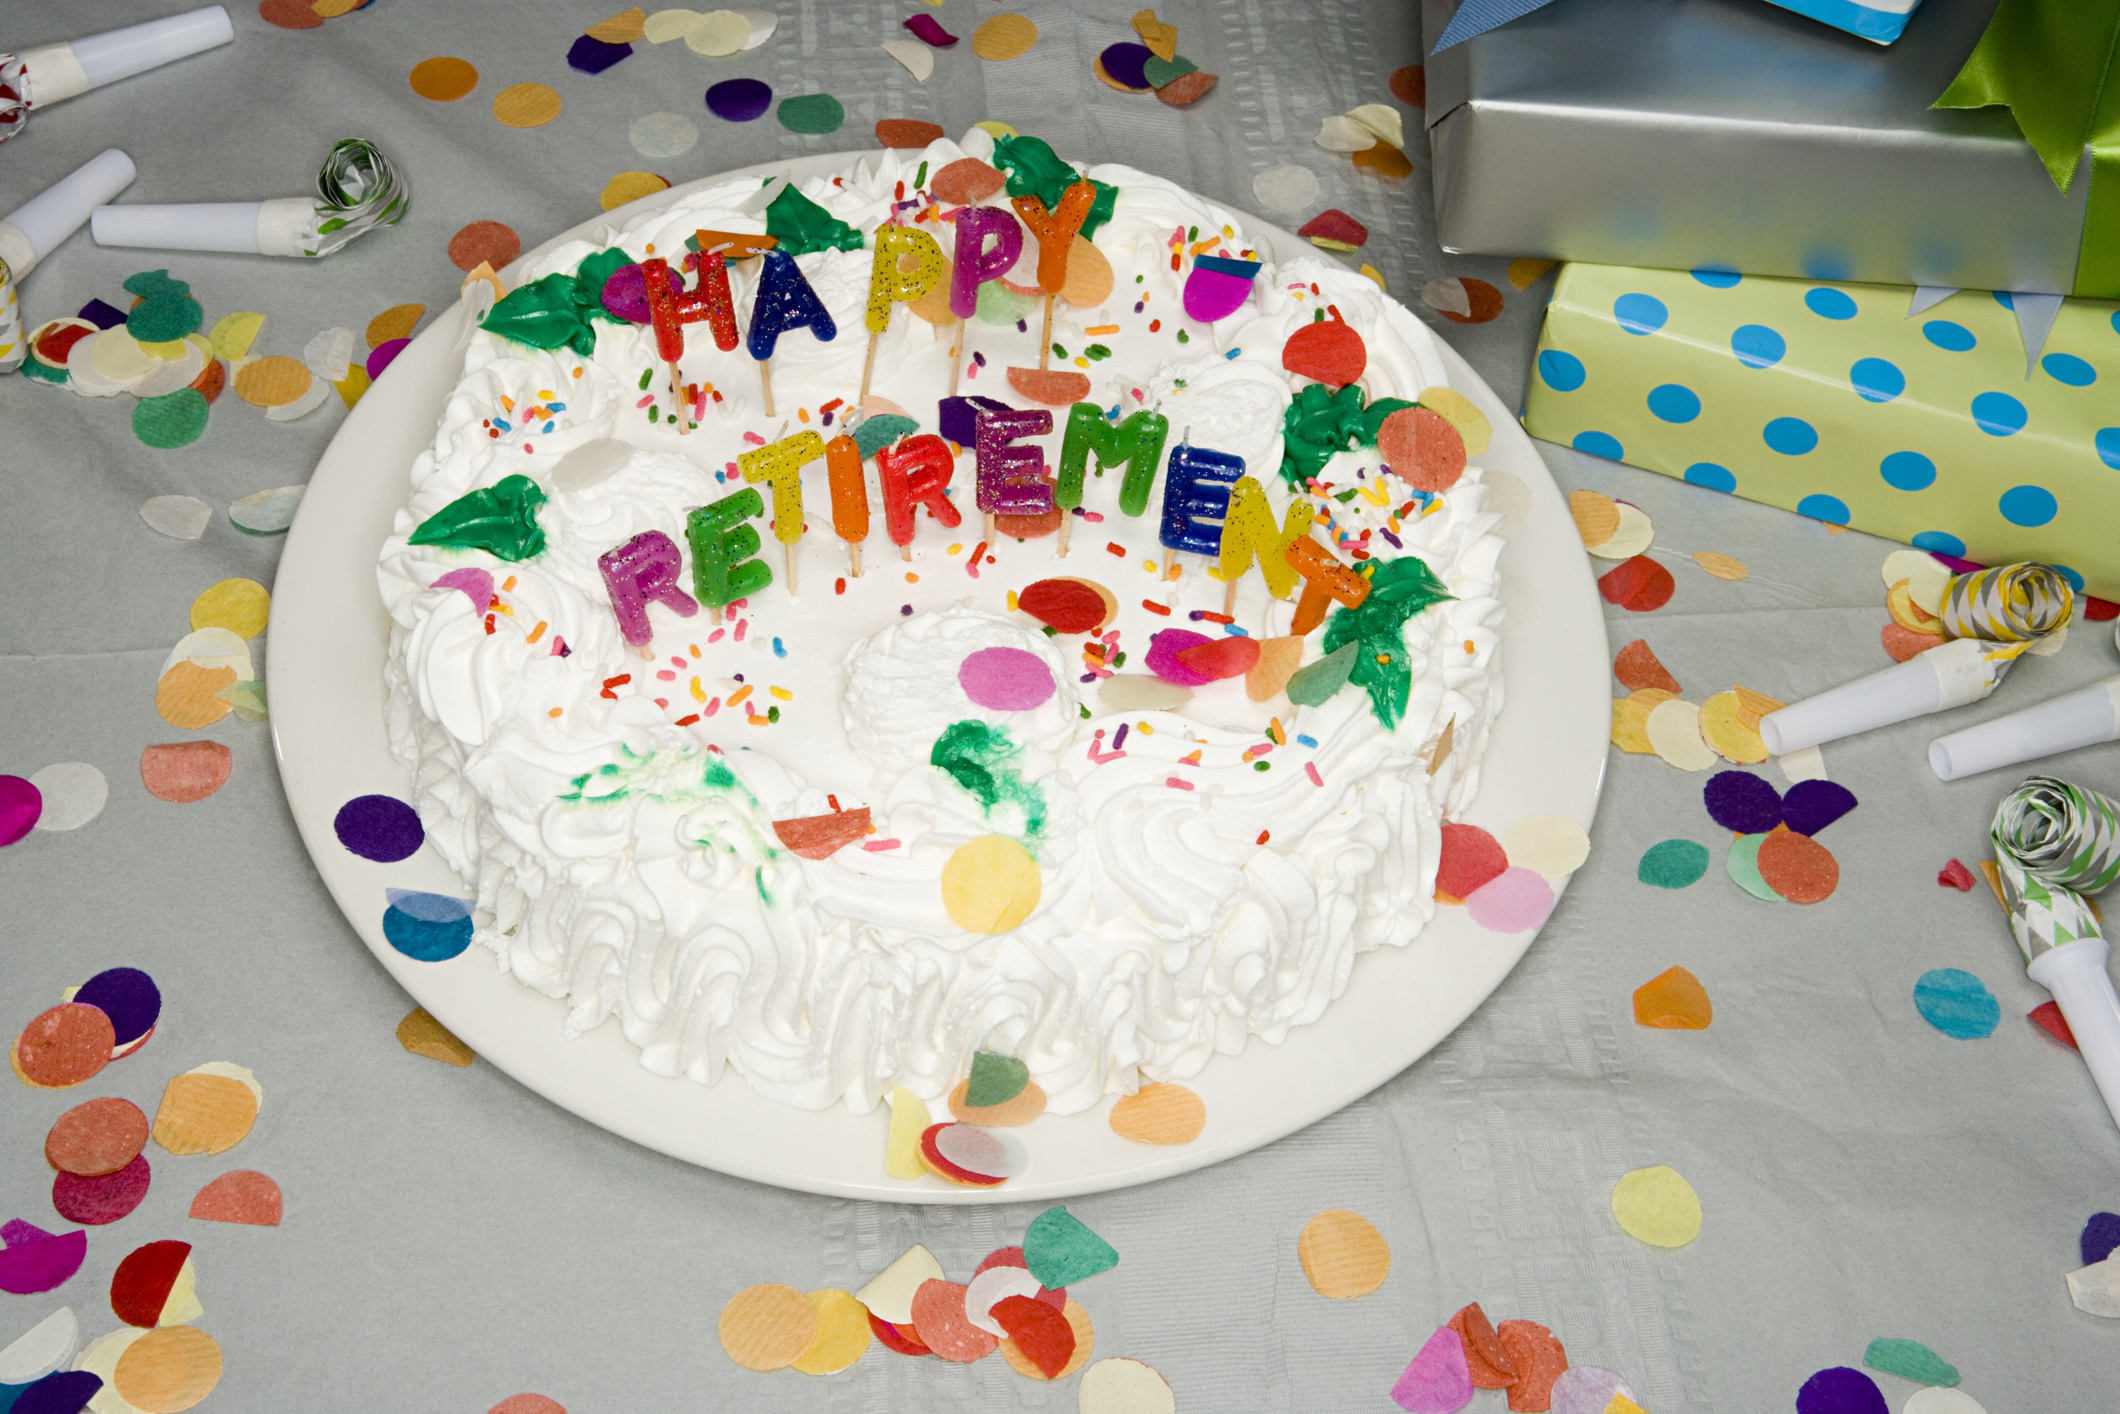 A retirement cake with &quot;Happy Retirement&quot; lettering surrounded by confetti and party blowers on a table